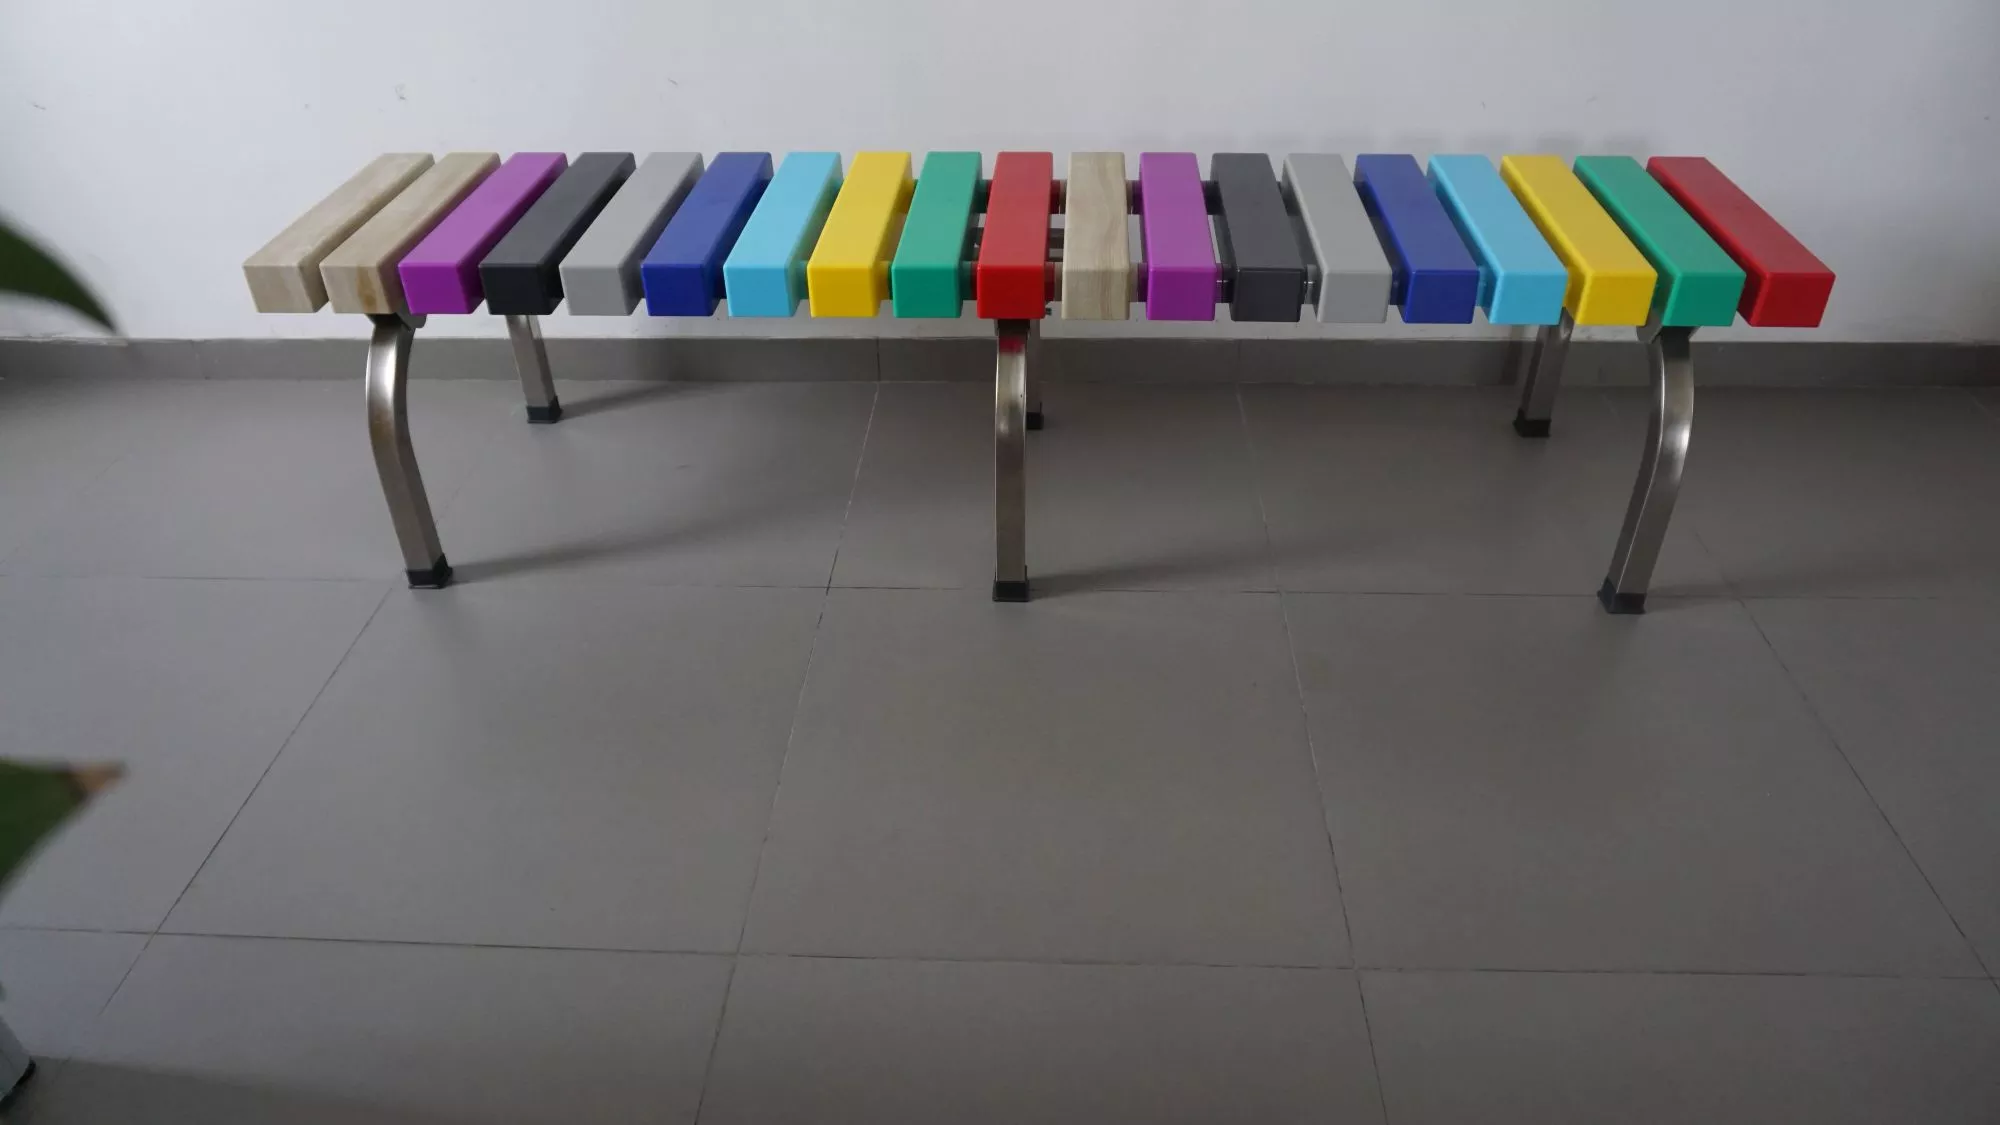 The ABS Plastic Bench